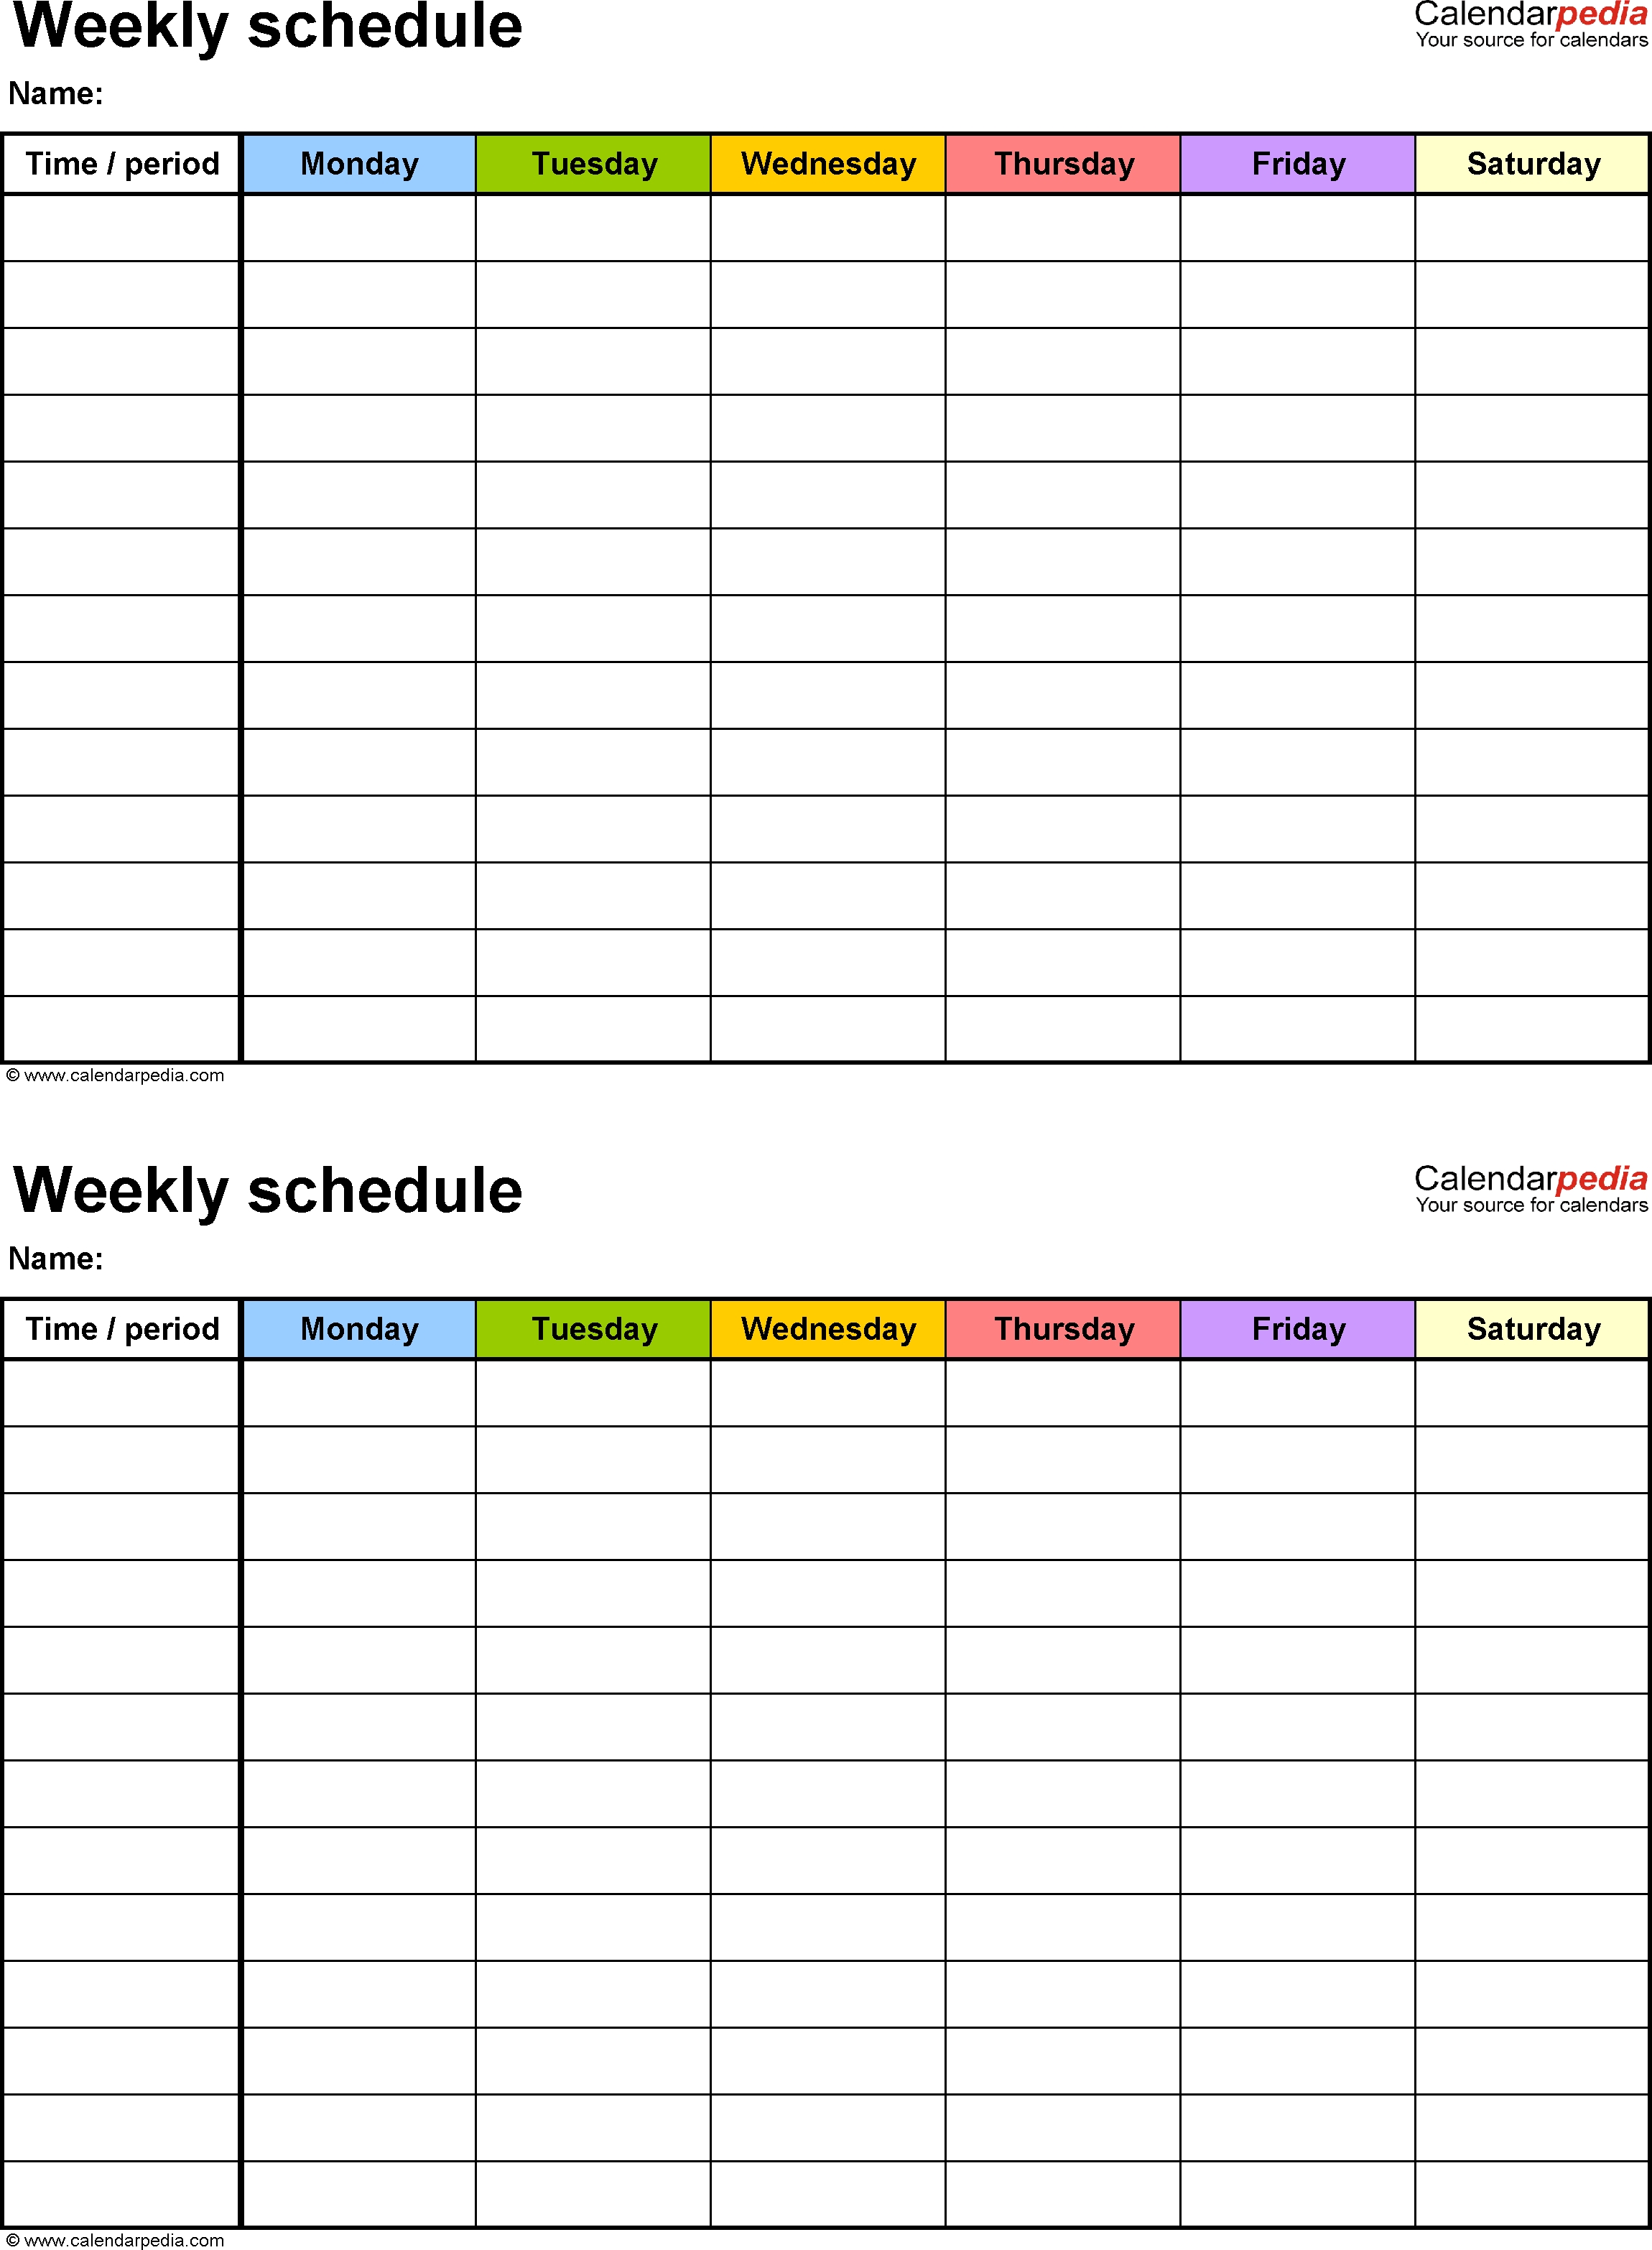 Free Weekly Schedule Templates For Word - 18 Templates 7 Day Calendar Template Word